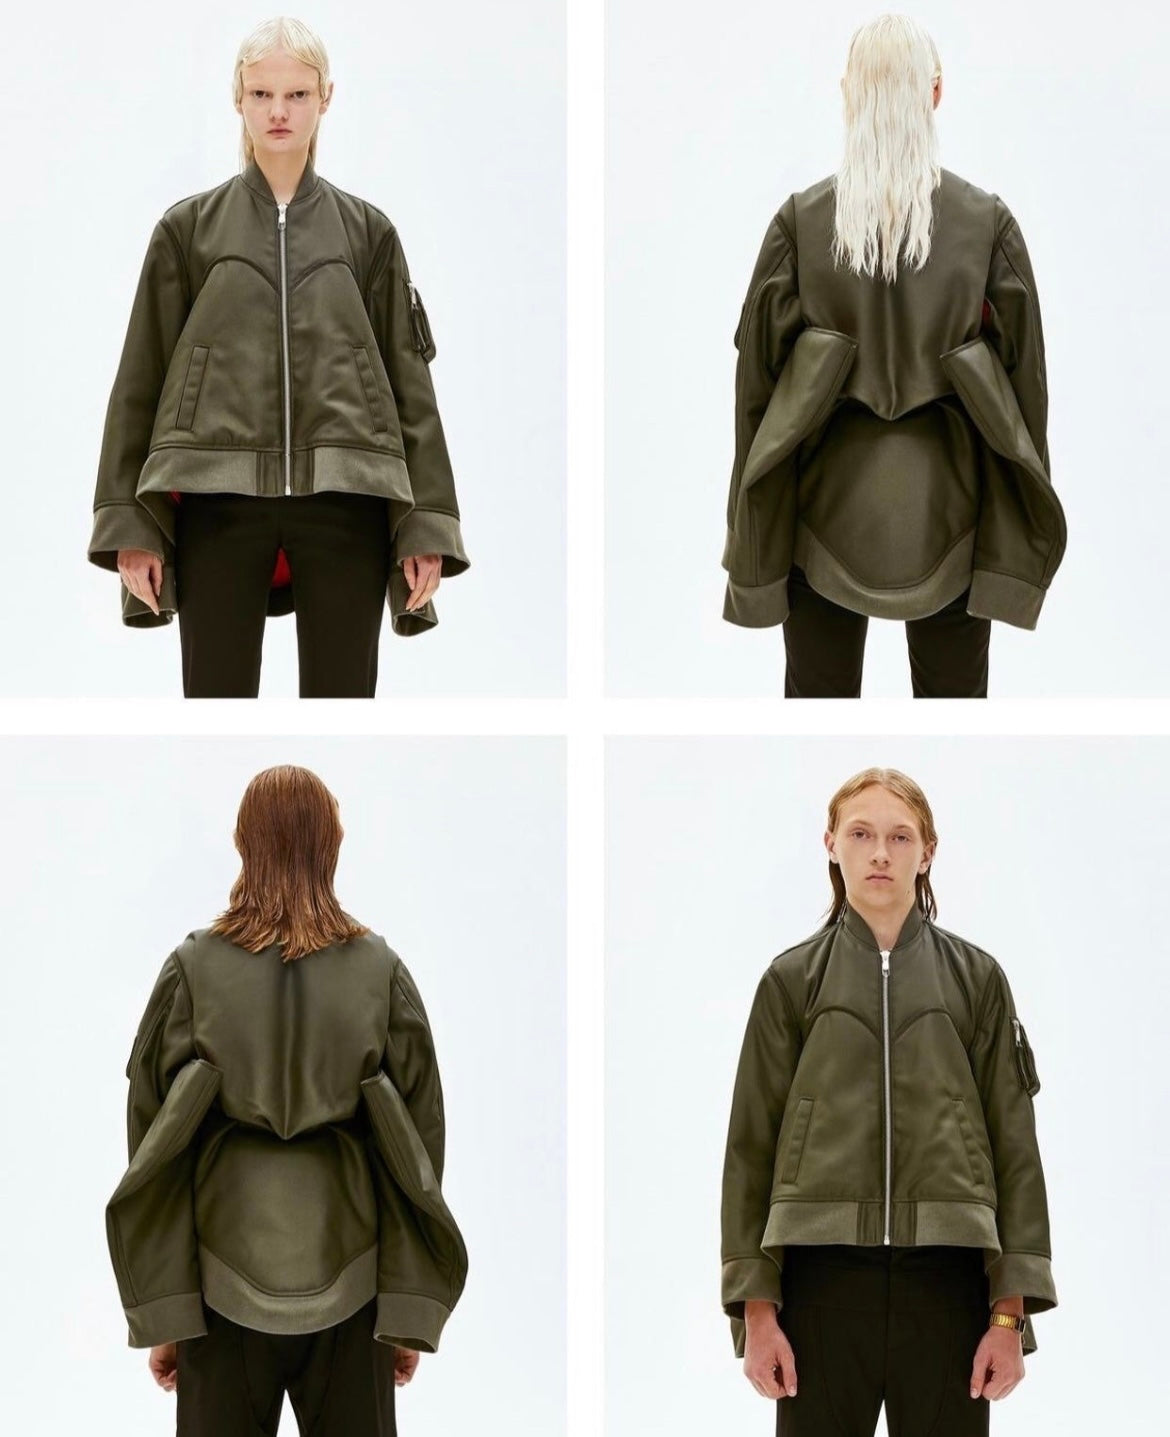 SS18 Helmut Lang By Shayne Oliver Four Arm MA-1 Bomber Jacket